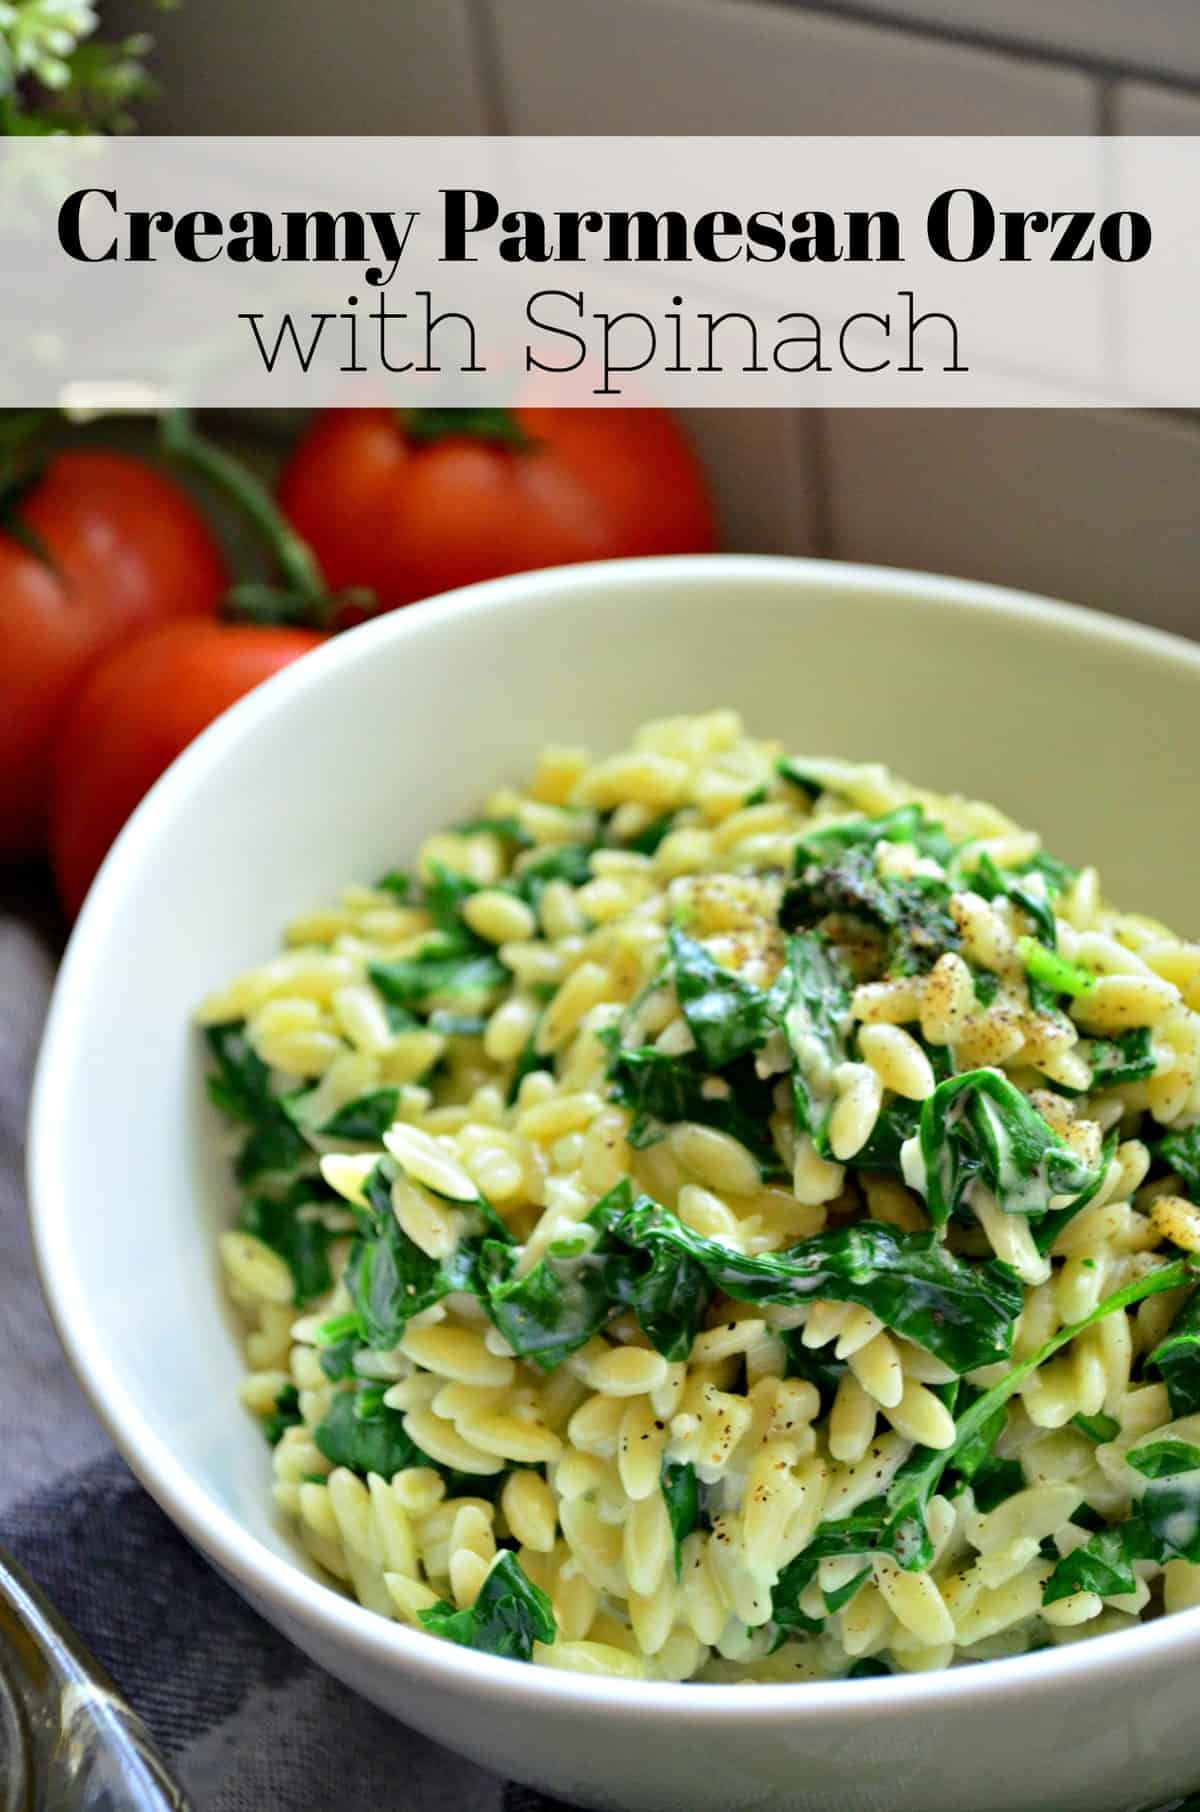 Creamy Parmesan Orzo with Spinach in bowl with title text.